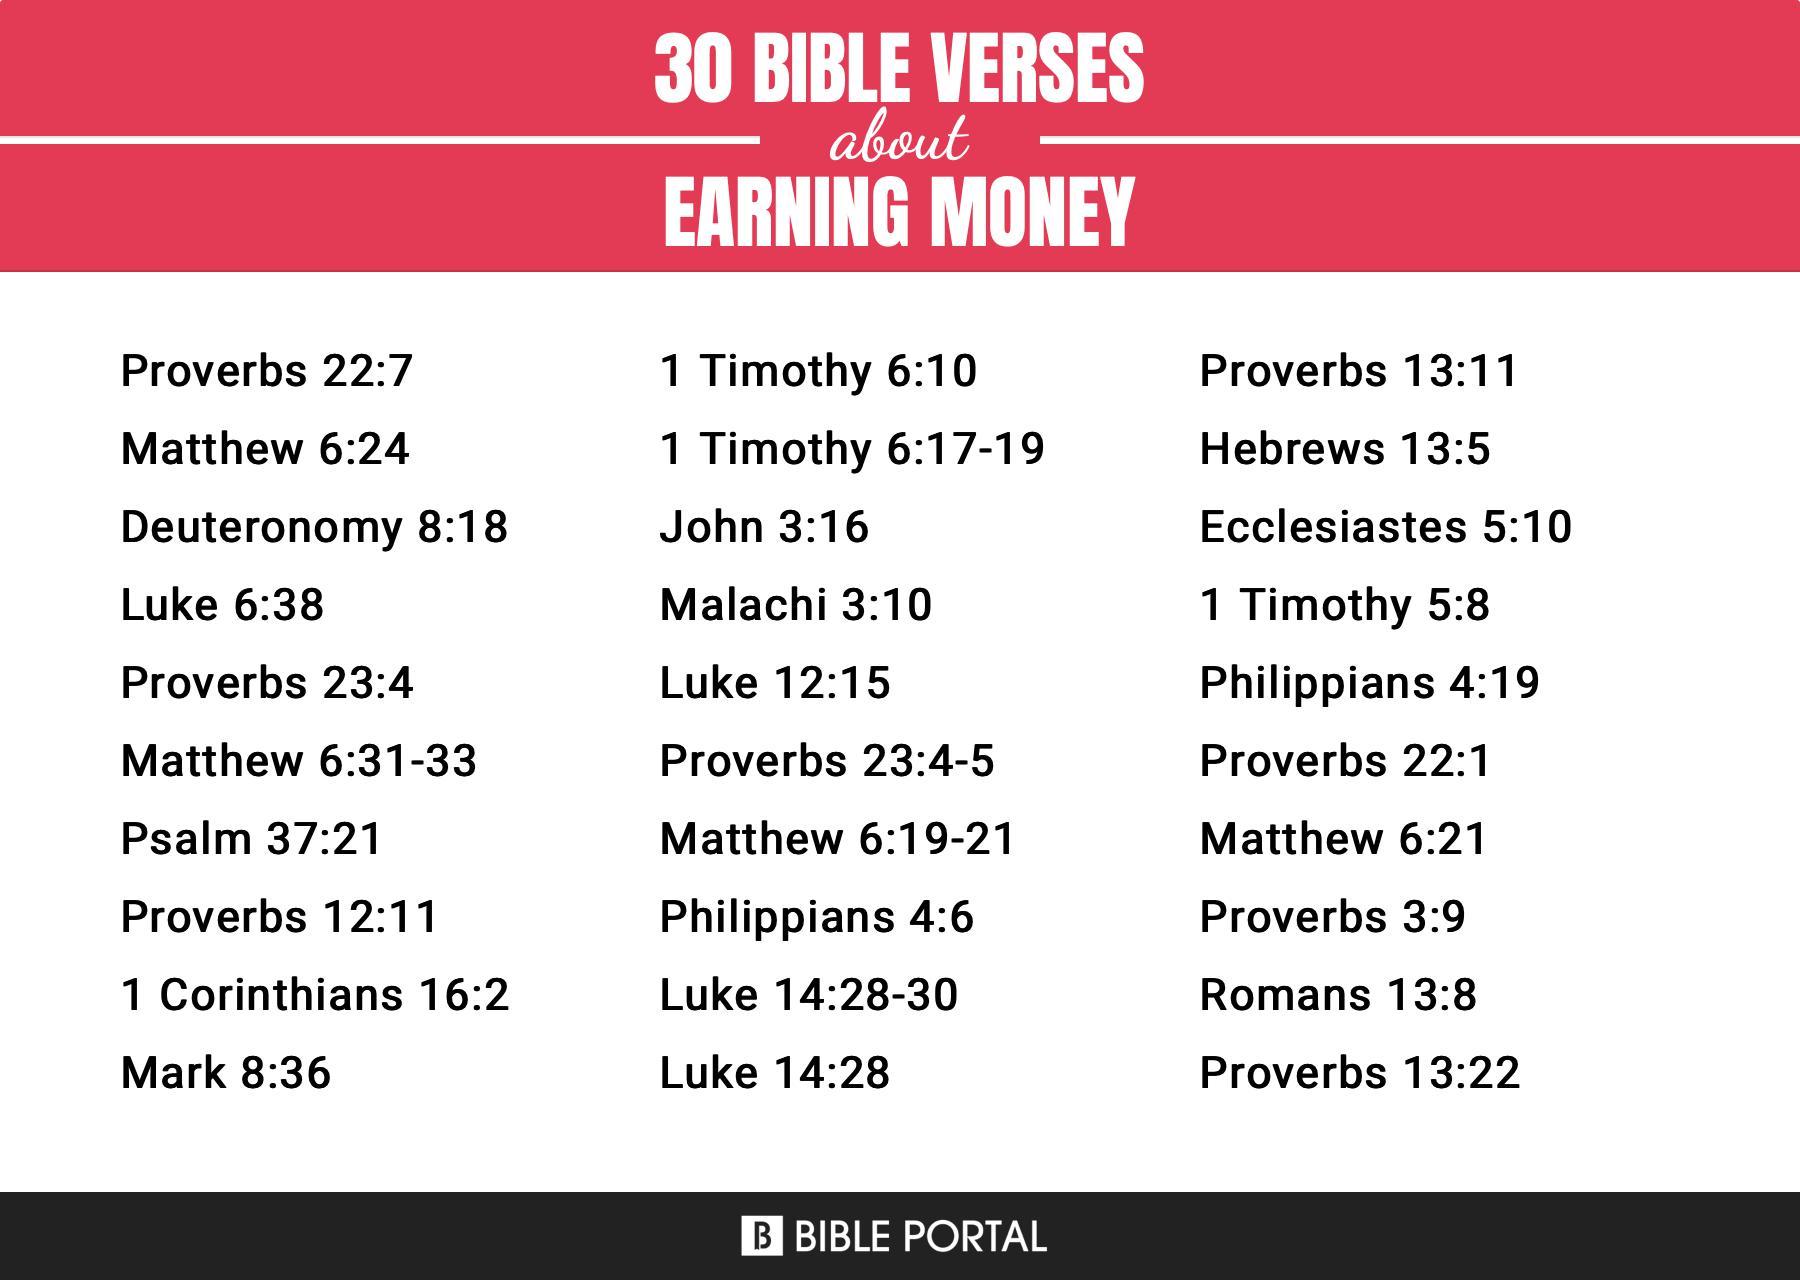 What Does the Bible Say about Earning Money?